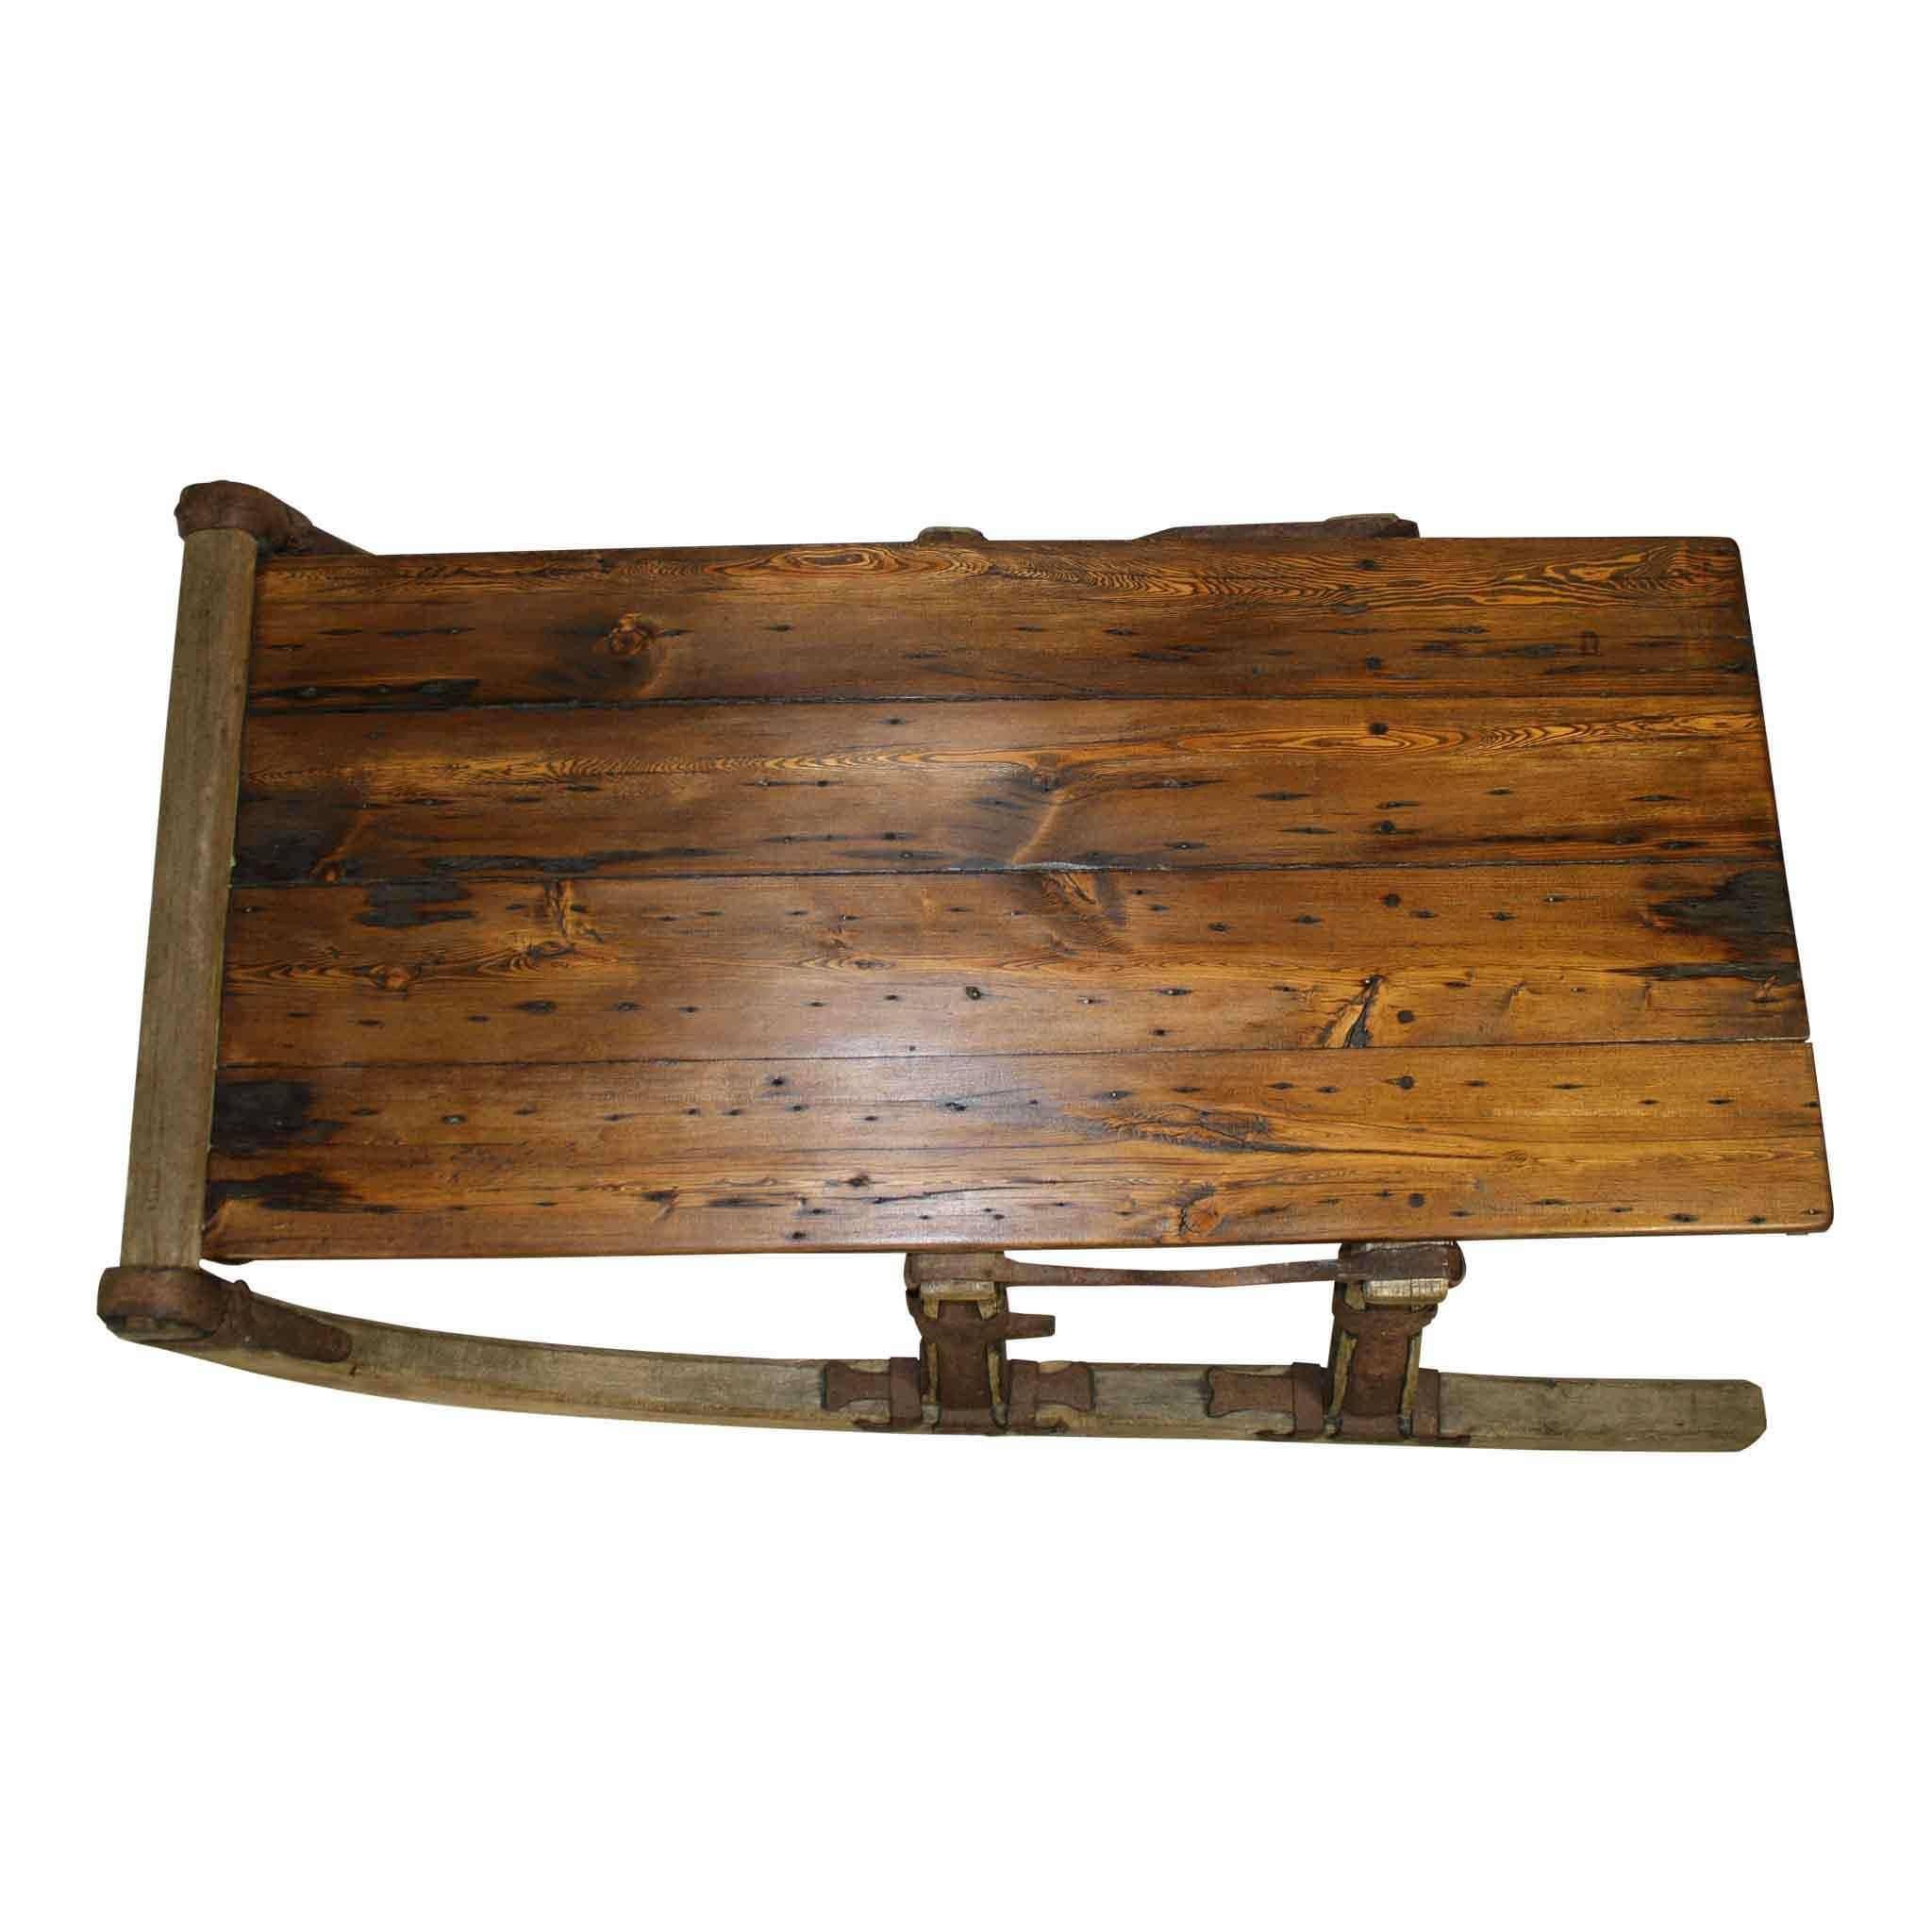 This runners of this re-purposed Russian sleigh, with lovely iron embellishments, has been made into a great looking coffee table. Reclaimed barn wood has been use for the tabletop, finished in a pleasing walnut stain.